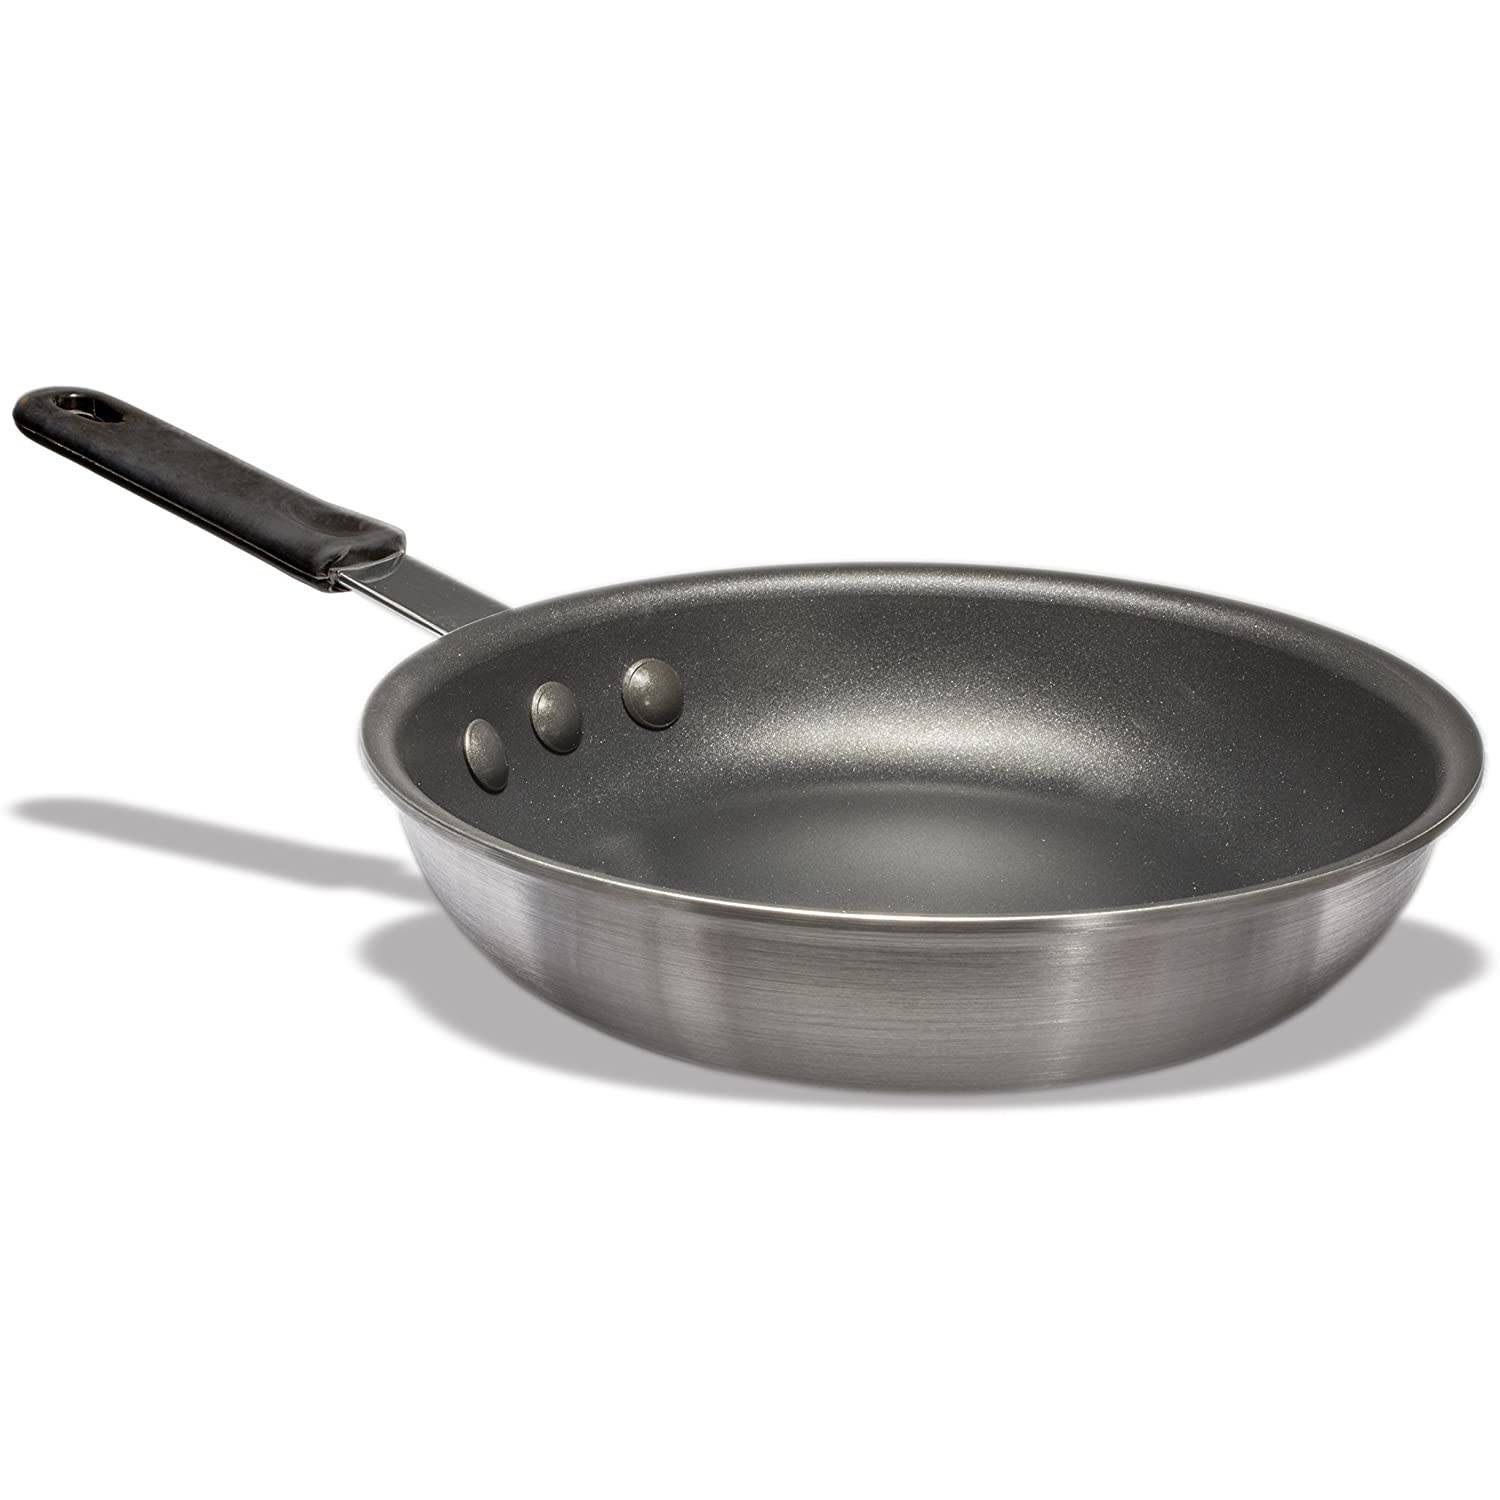 Crestware FRY12SH Teflon Fry Pan with Dupont Coating and Stay Cool